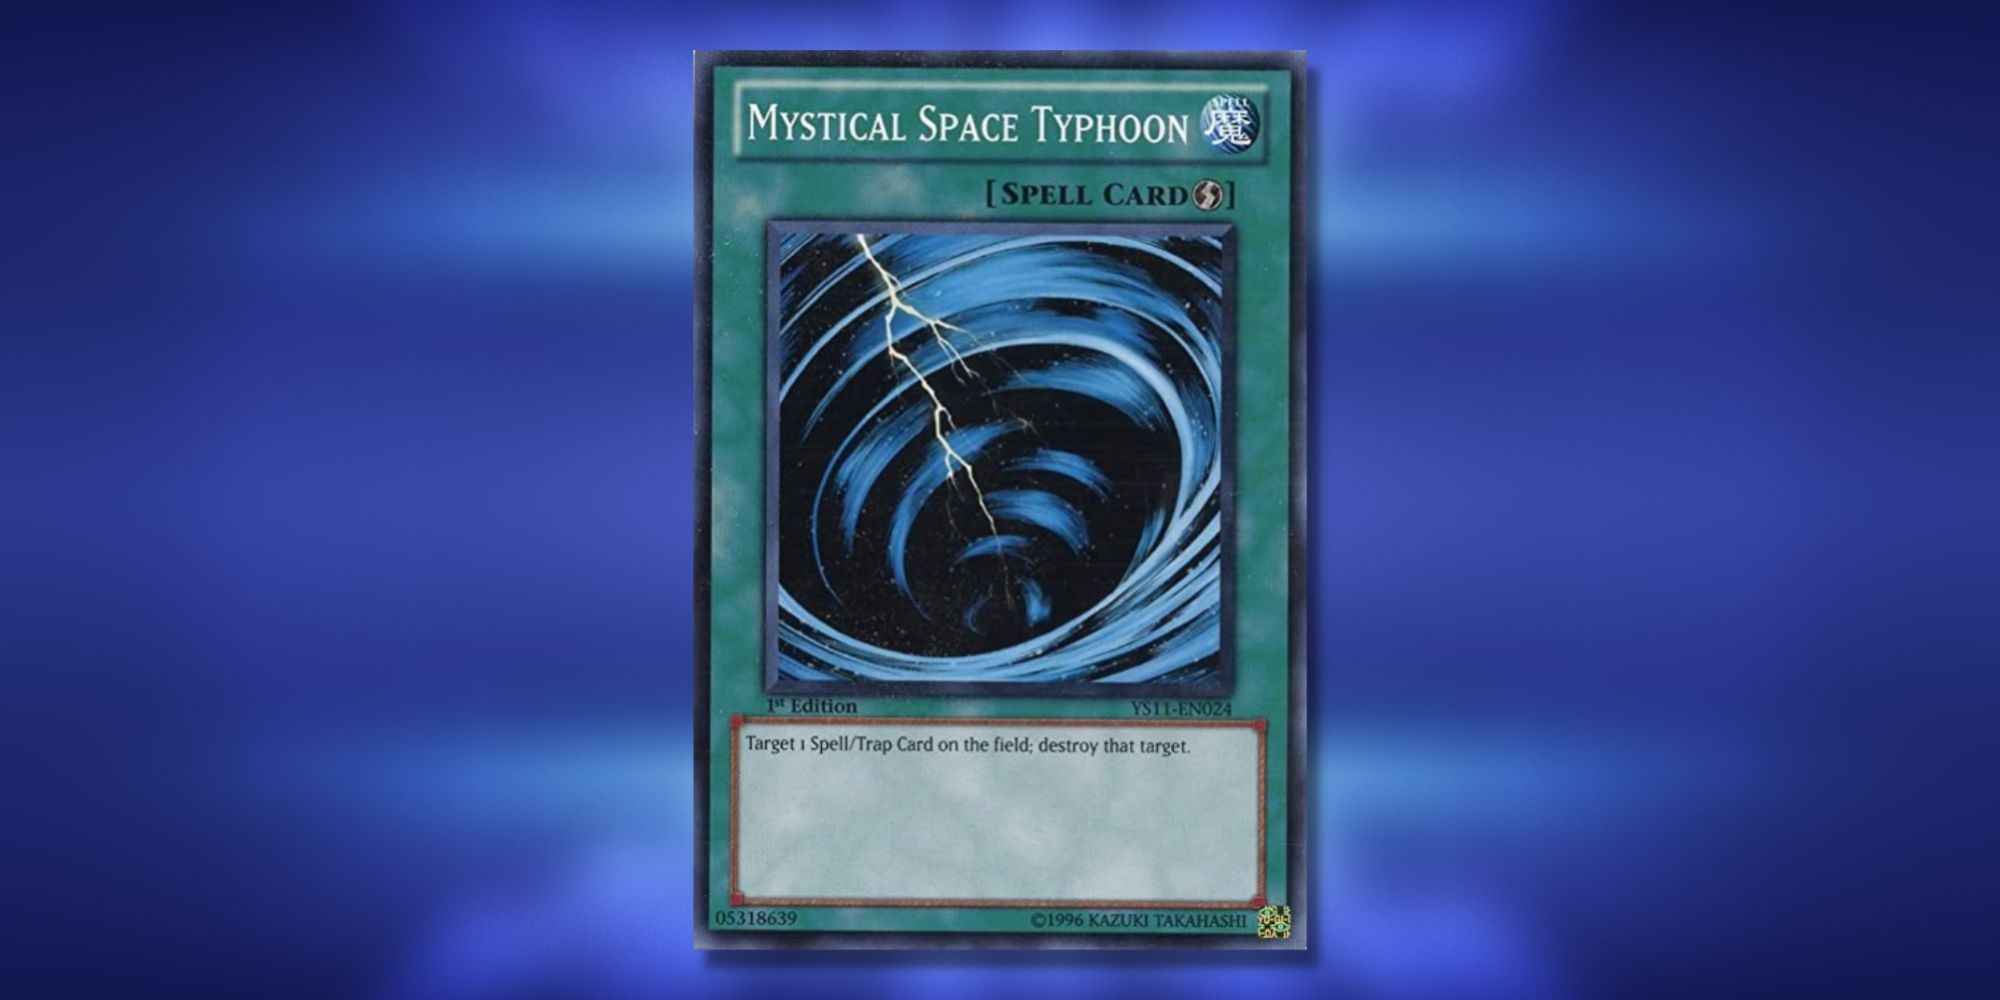 Mystical Space Typhoon, a Yu-Gi-Oh spell card, on a blurred blue background.